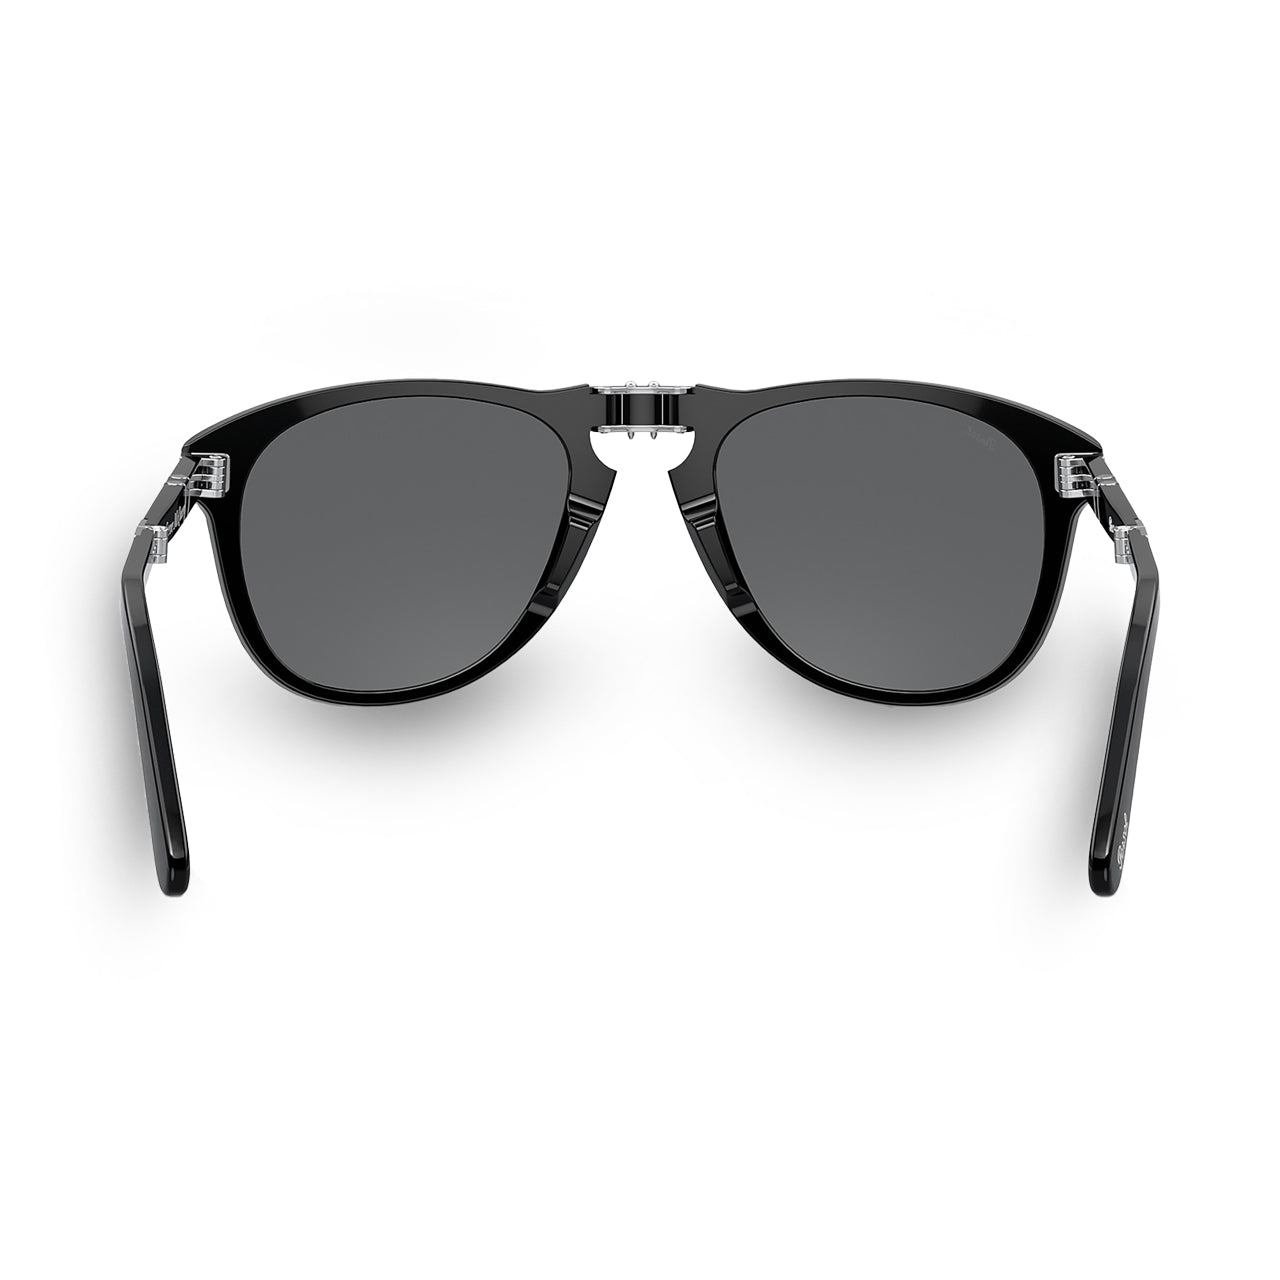 Persol® Men's Sunglasses - Classic Style and Quality